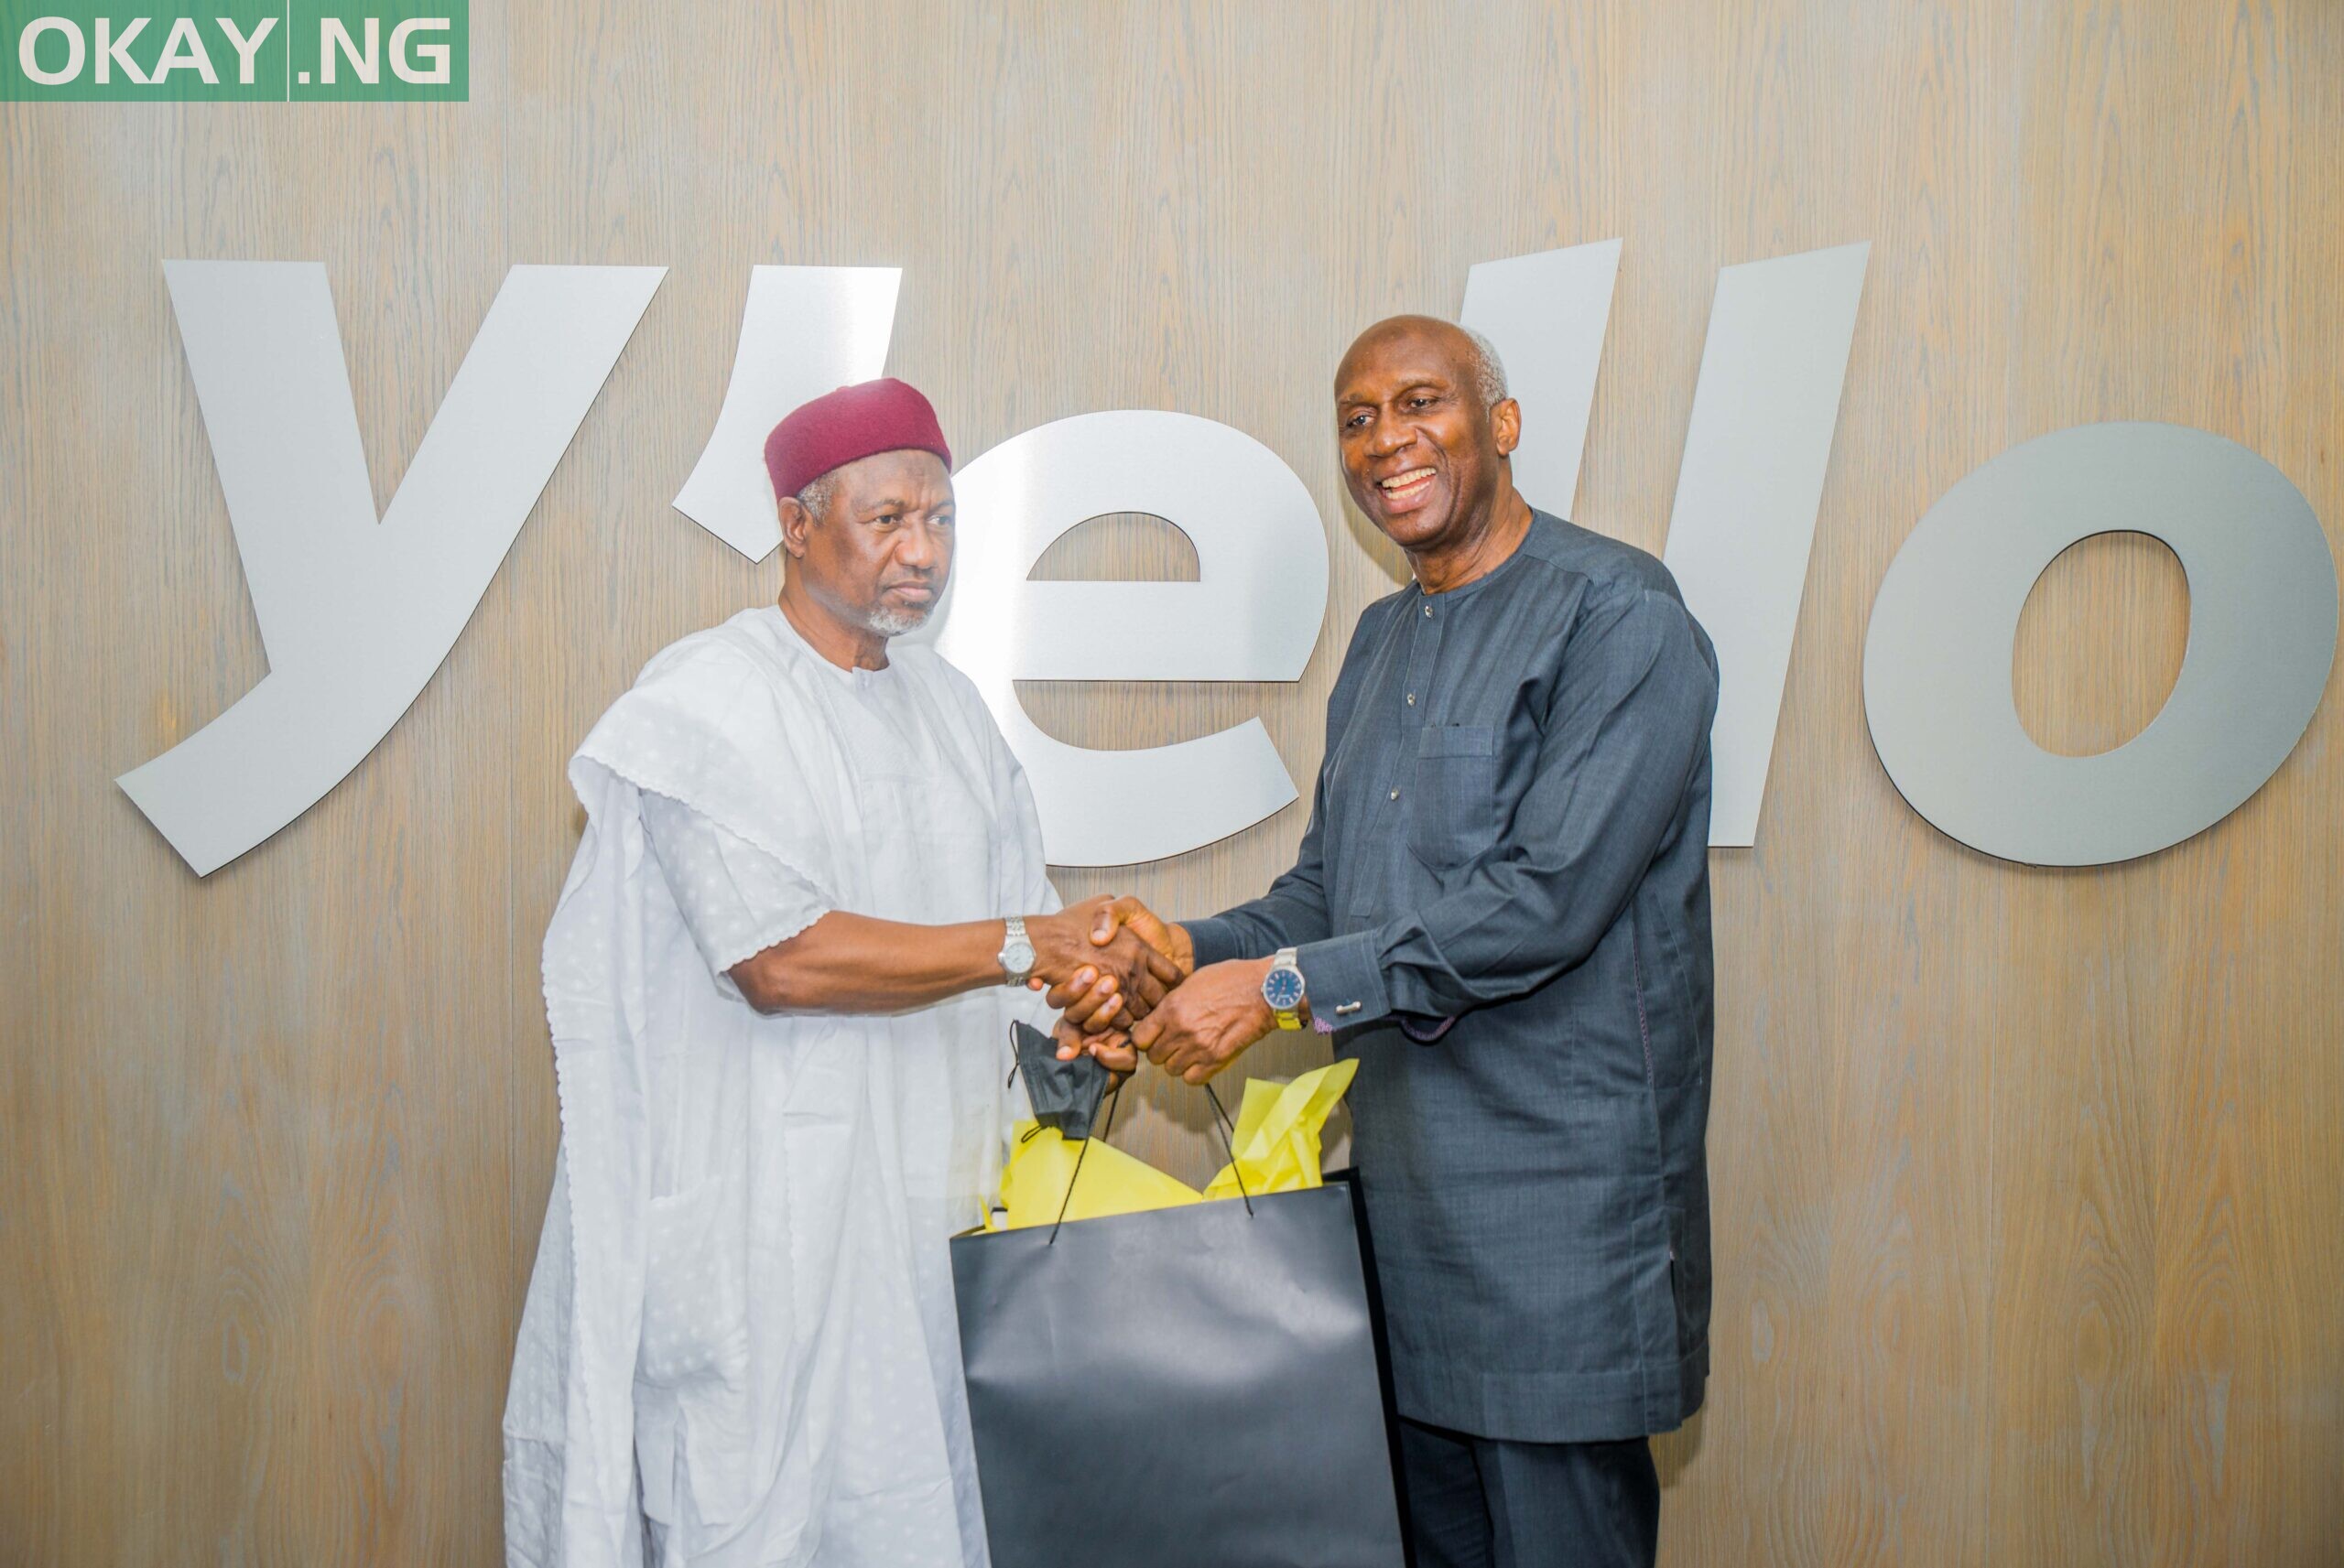 L-R: Nigeria High Commissioner accredited to South Africa, H.E. Muhammad Haruna Manta and Chairman, MTN Nigeria, Dr. Ernest Ndukwe, OFR at MTN Group headquarters